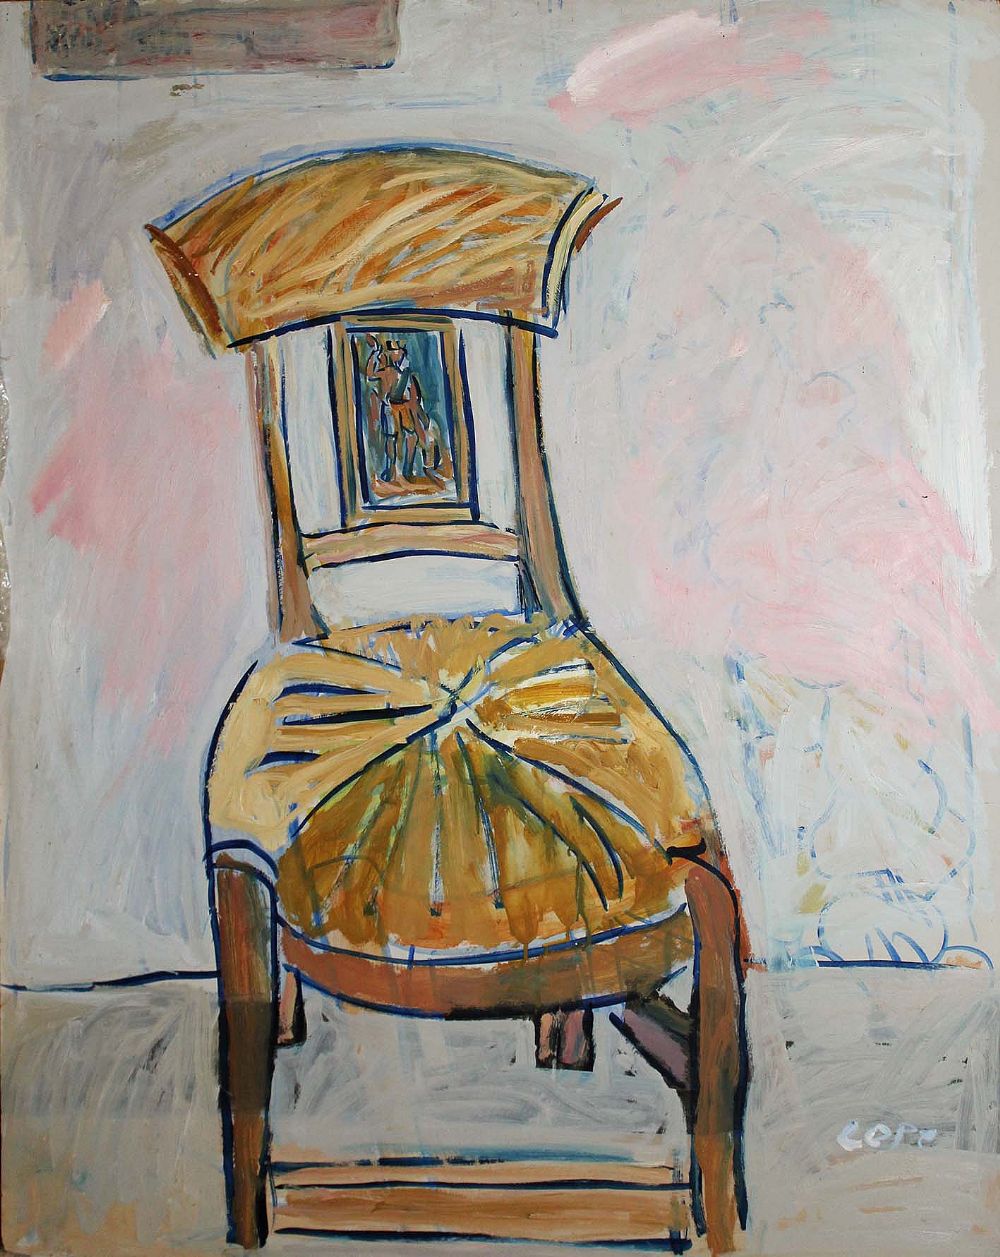 CHAIR by Elizabeth Cope  at deVeres Auctions